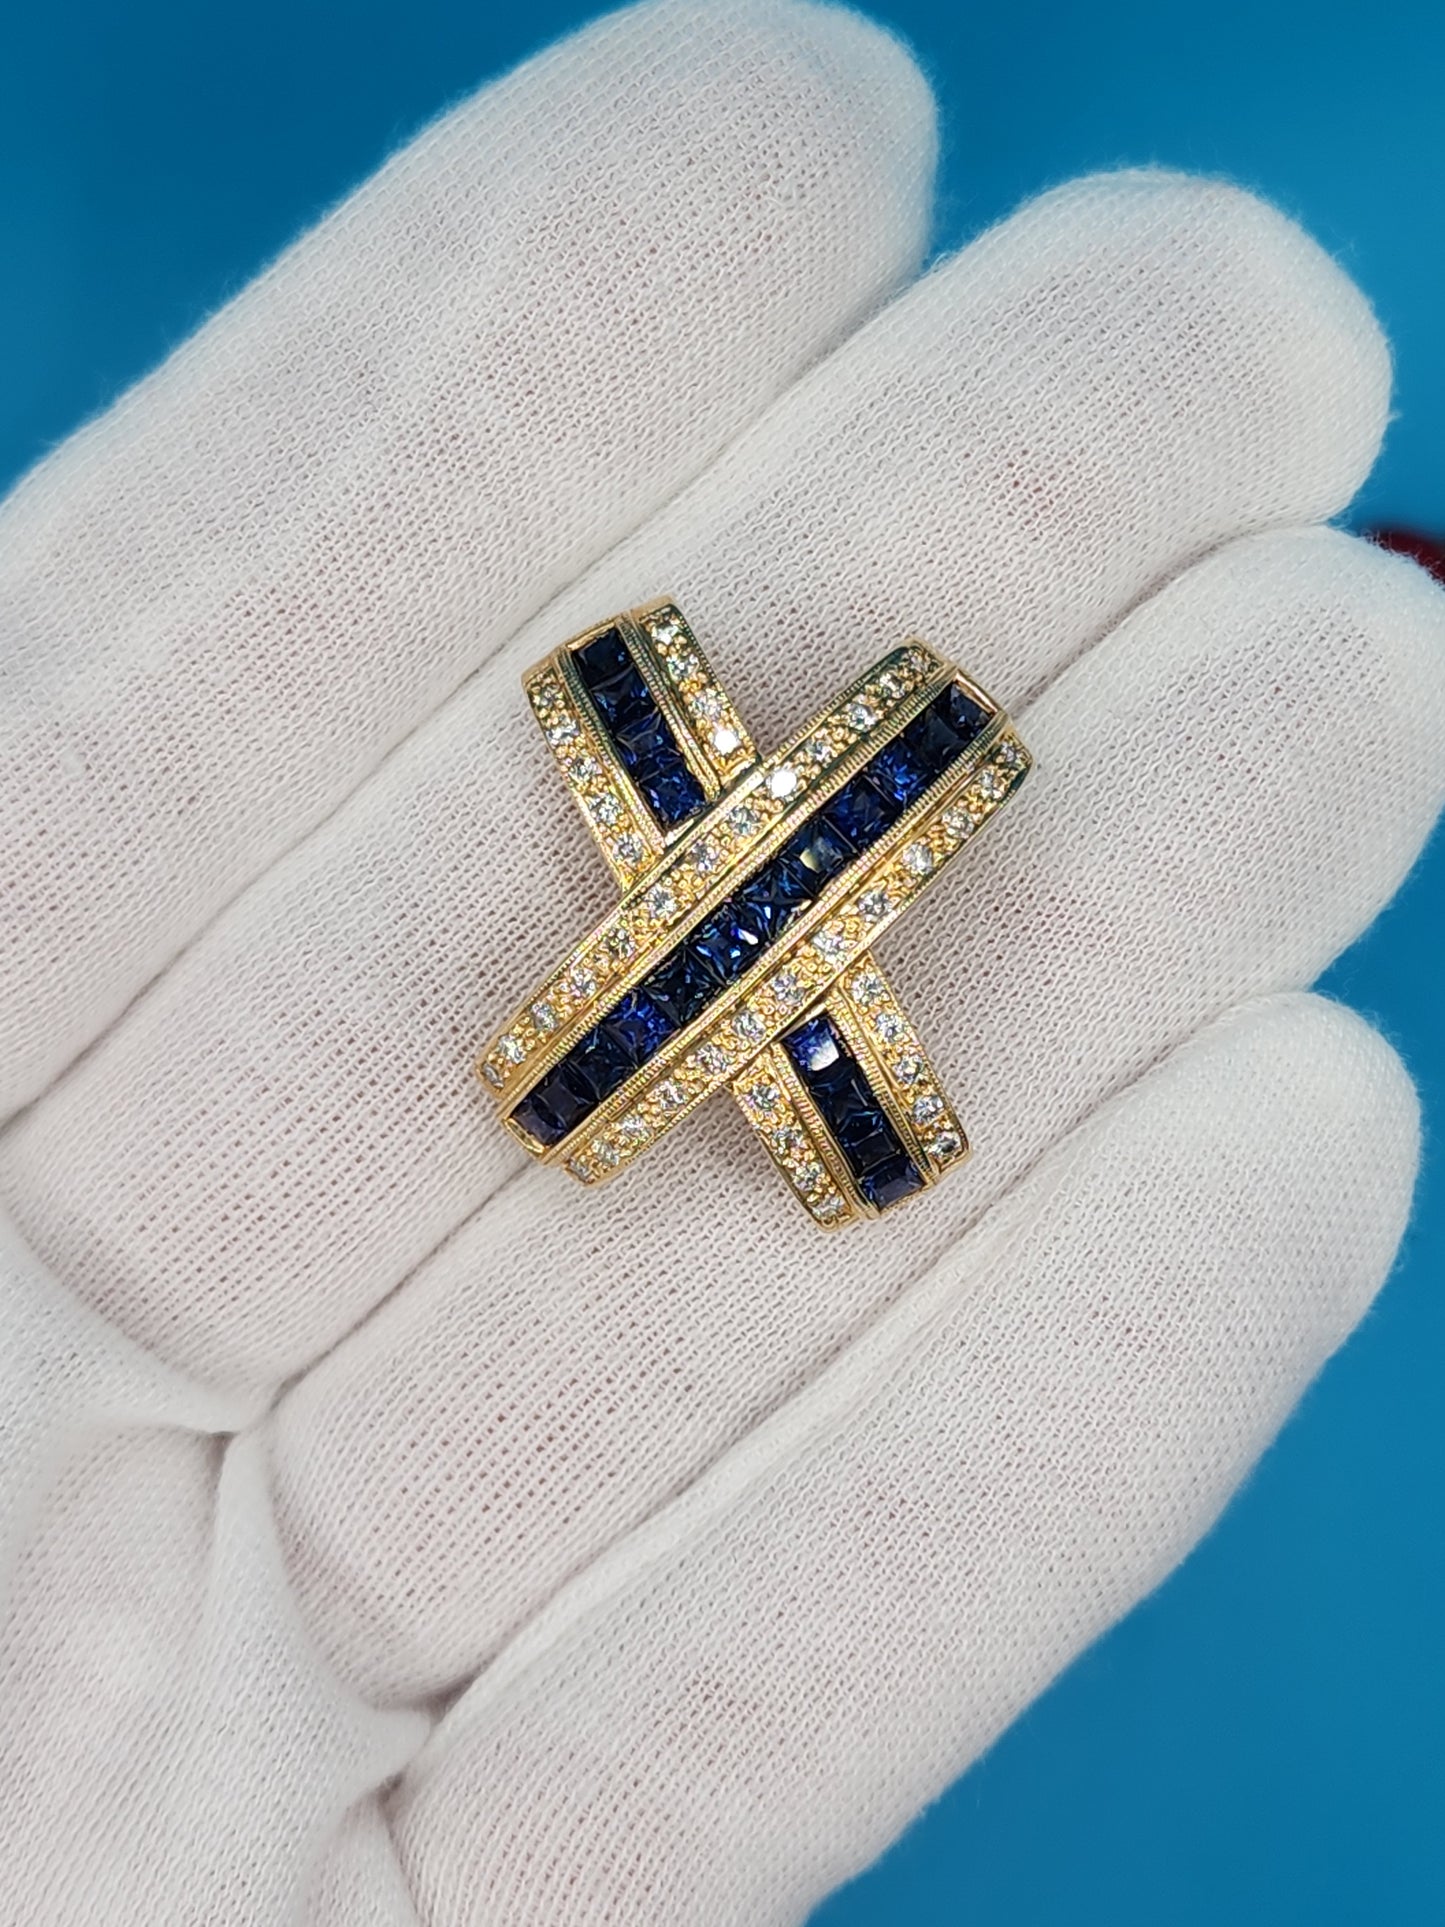 Large "X" Shape Pendant/Slide in 14k Yellow Gold with Genuine Sapphires and Diamonds